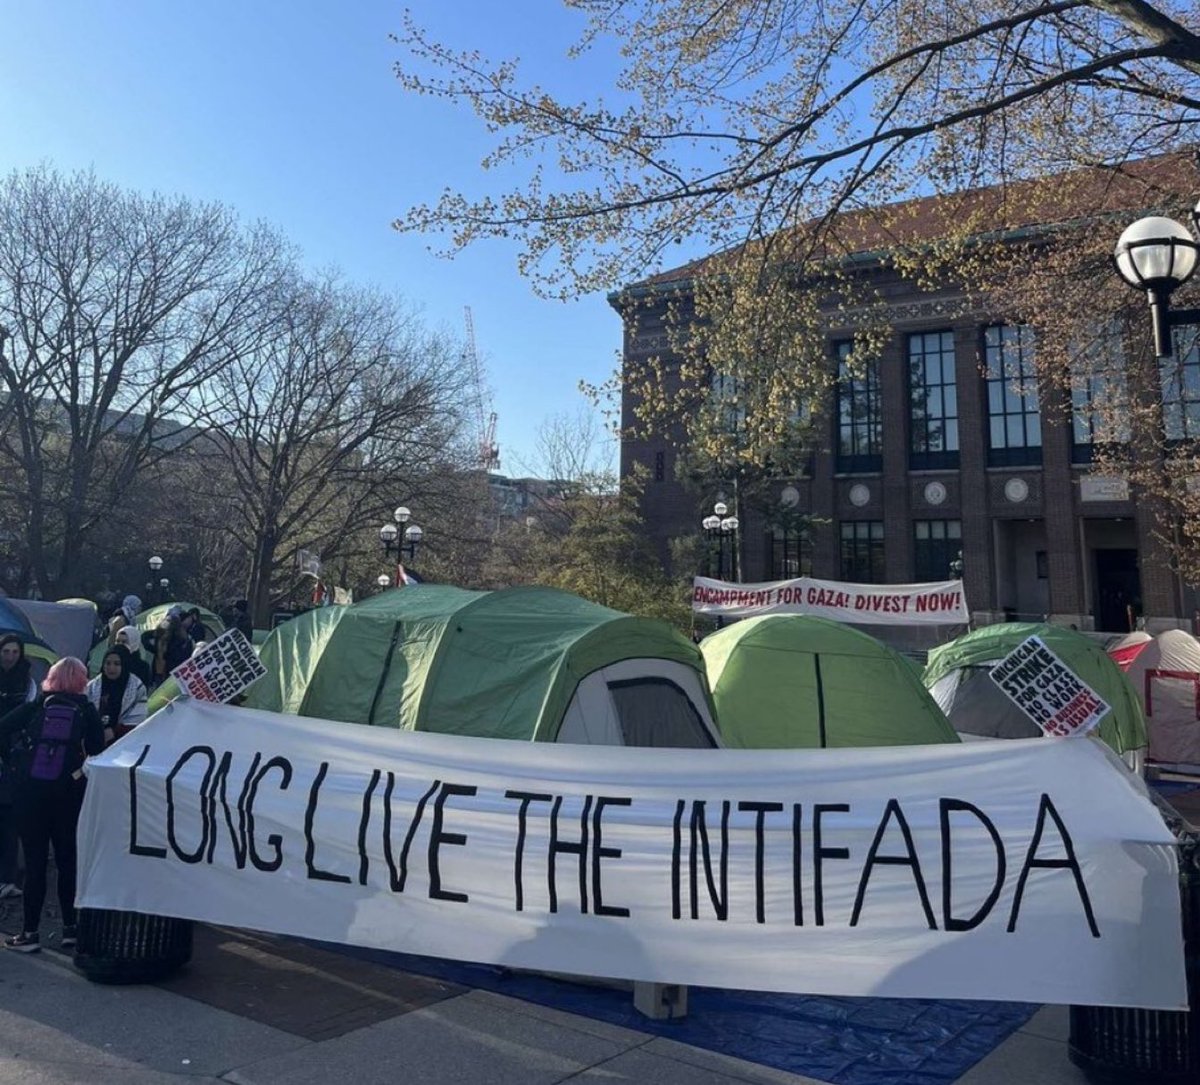 This sign-Long Live the Intifada-is a direct call to murder Jews, blowing up bus stops, pizza shops, & discos. That’s what the intifada was. Know it or not, that’s what these students are asking for. Incitement to murder should have no place at @UMich or anywhere else.